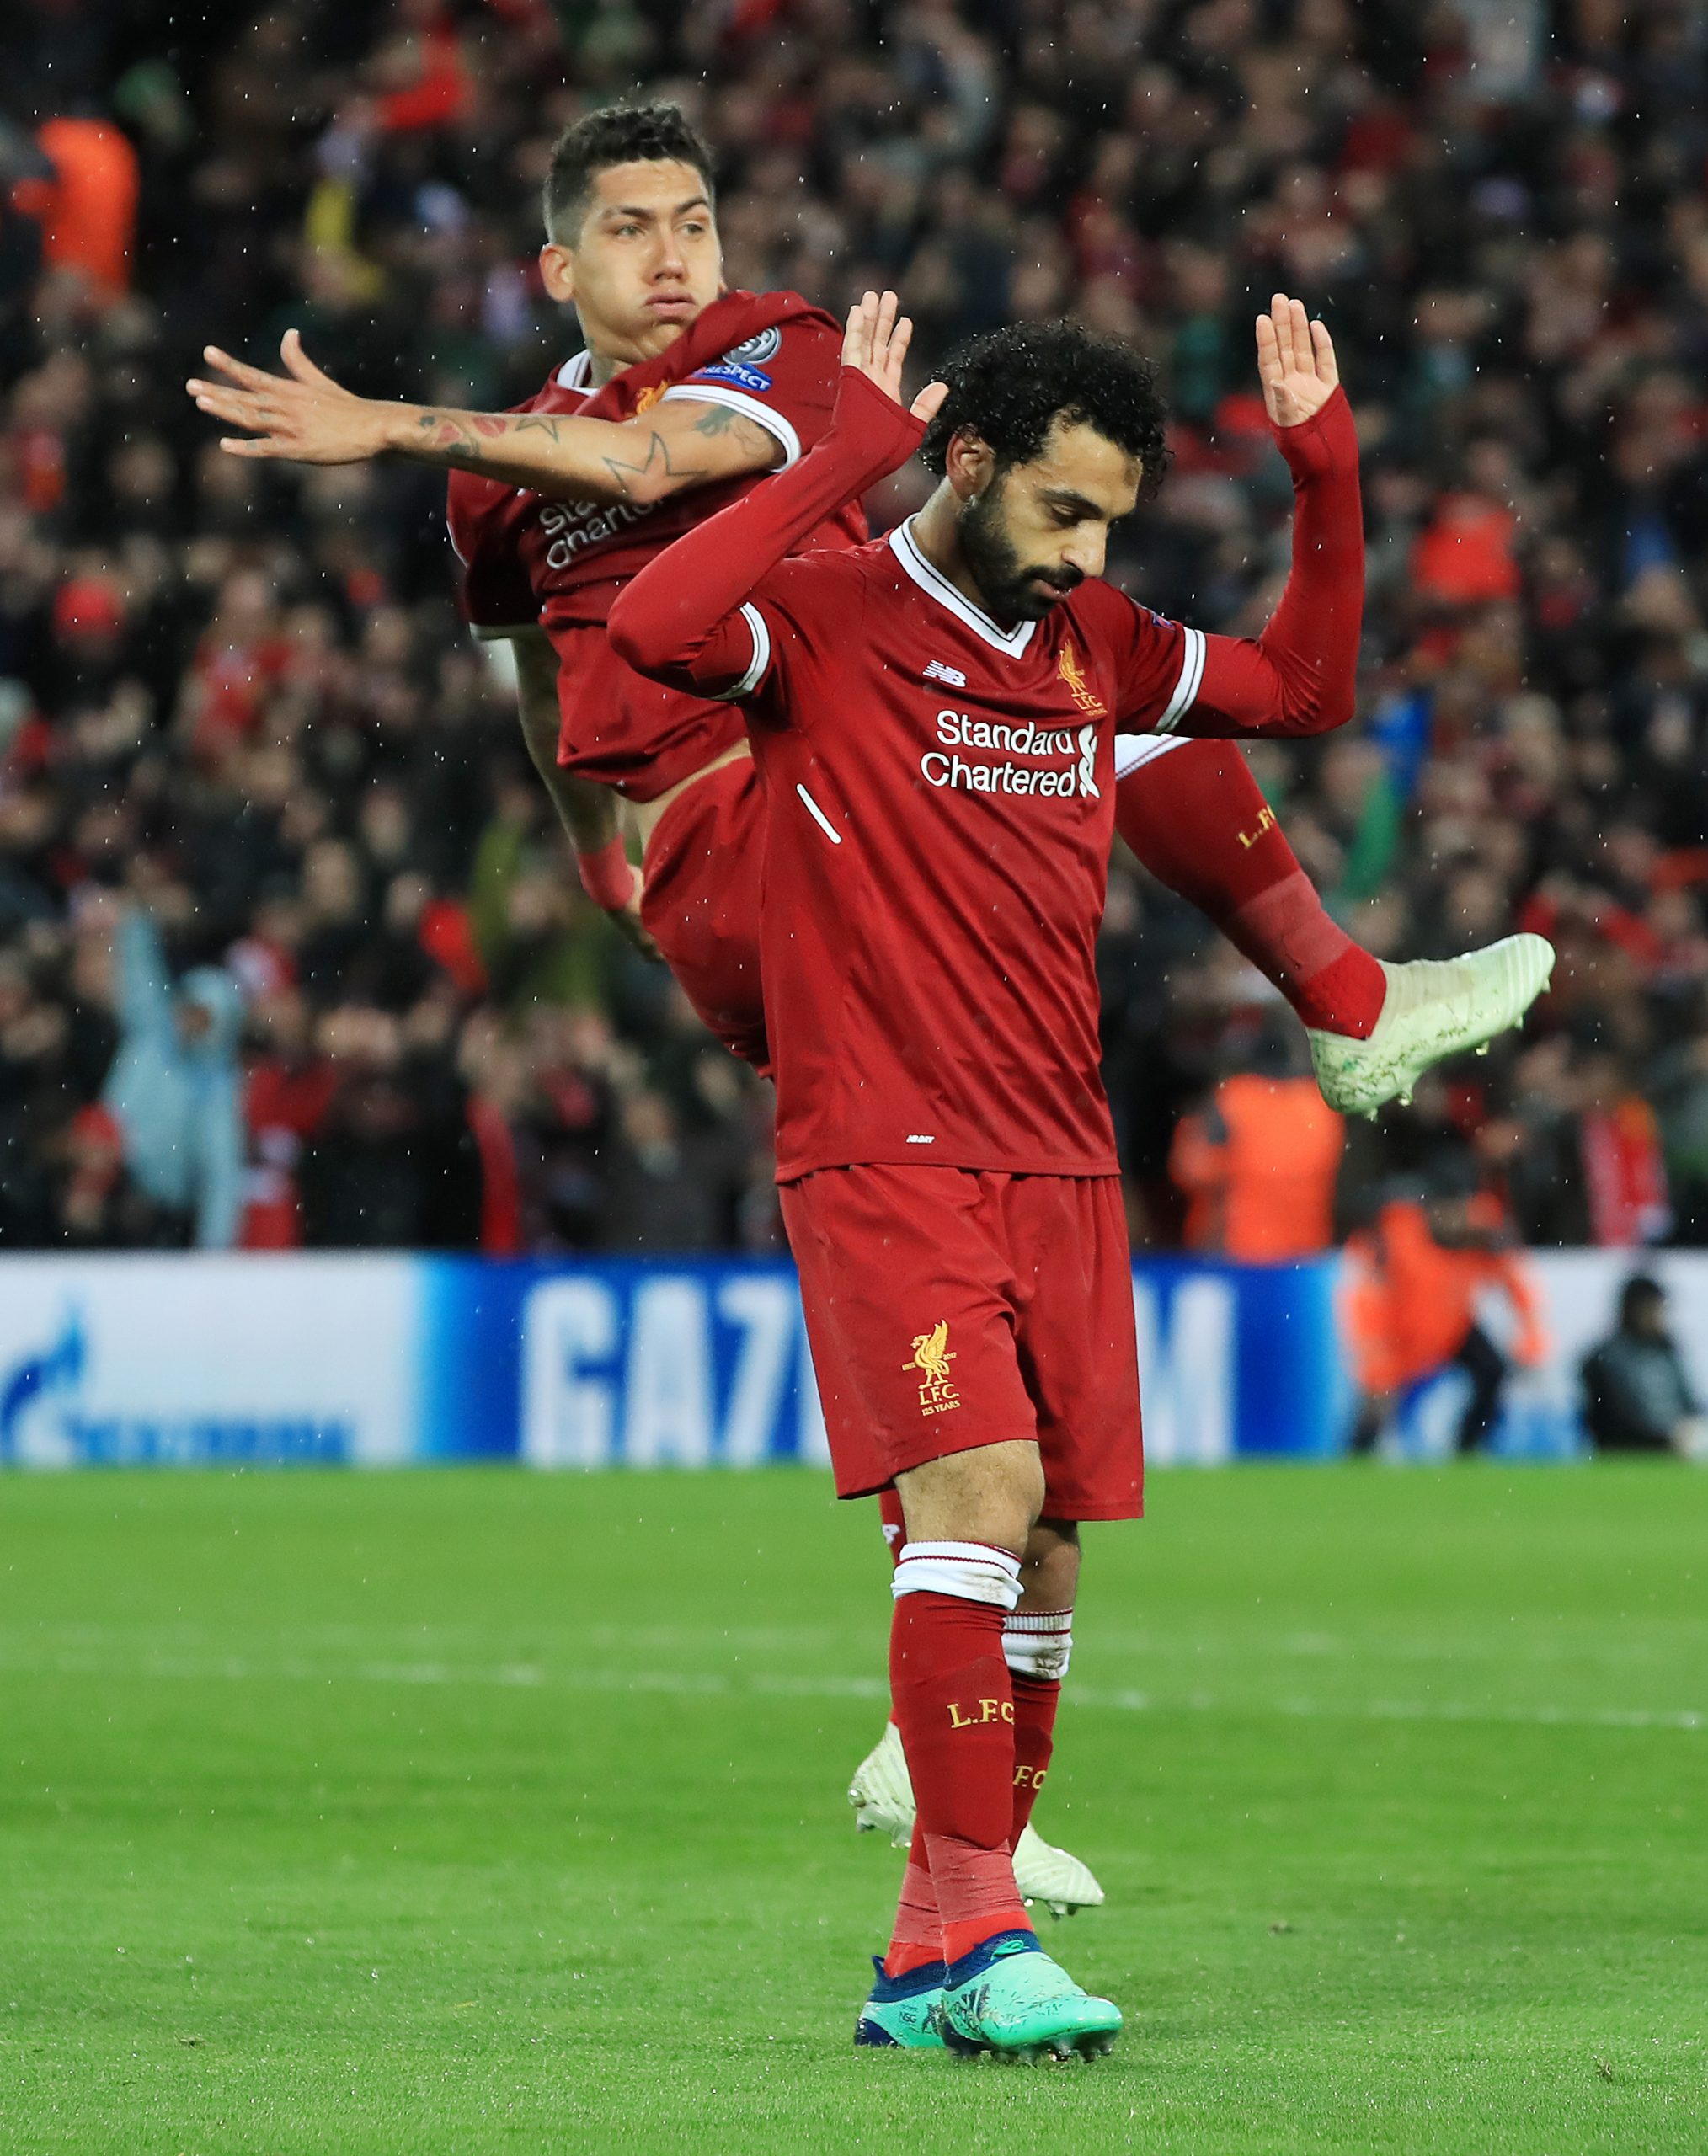 Champions League Spotlight: How Roberto Firmino and Mohamed Salah Propel Liverpool